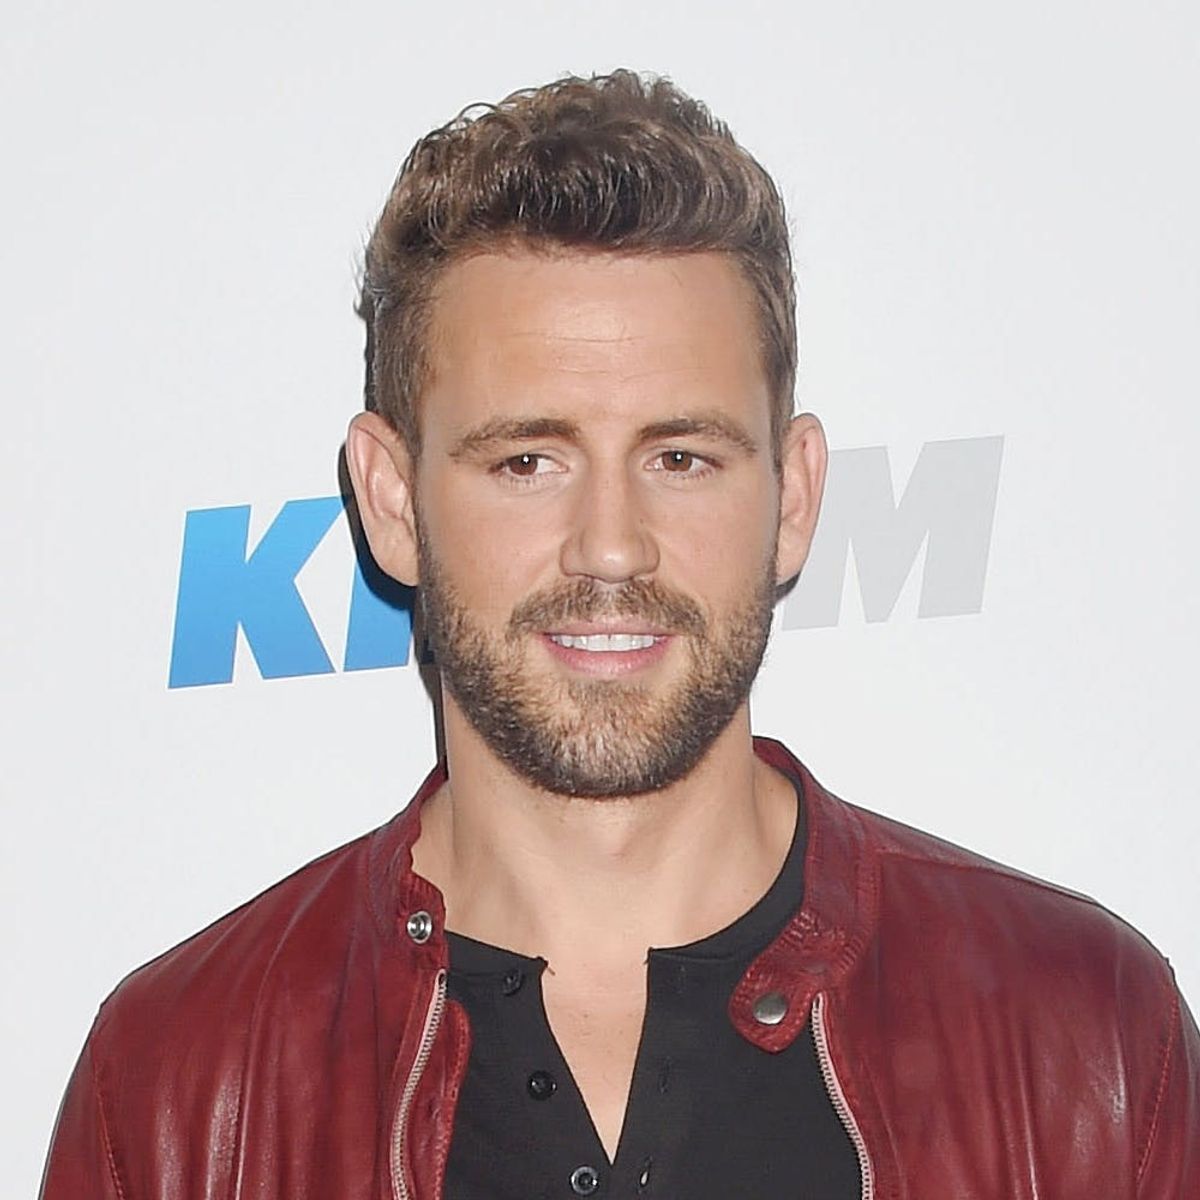 The Bachelor’s Nick Viall Reveals He’s “Definitely Found Love” This Season